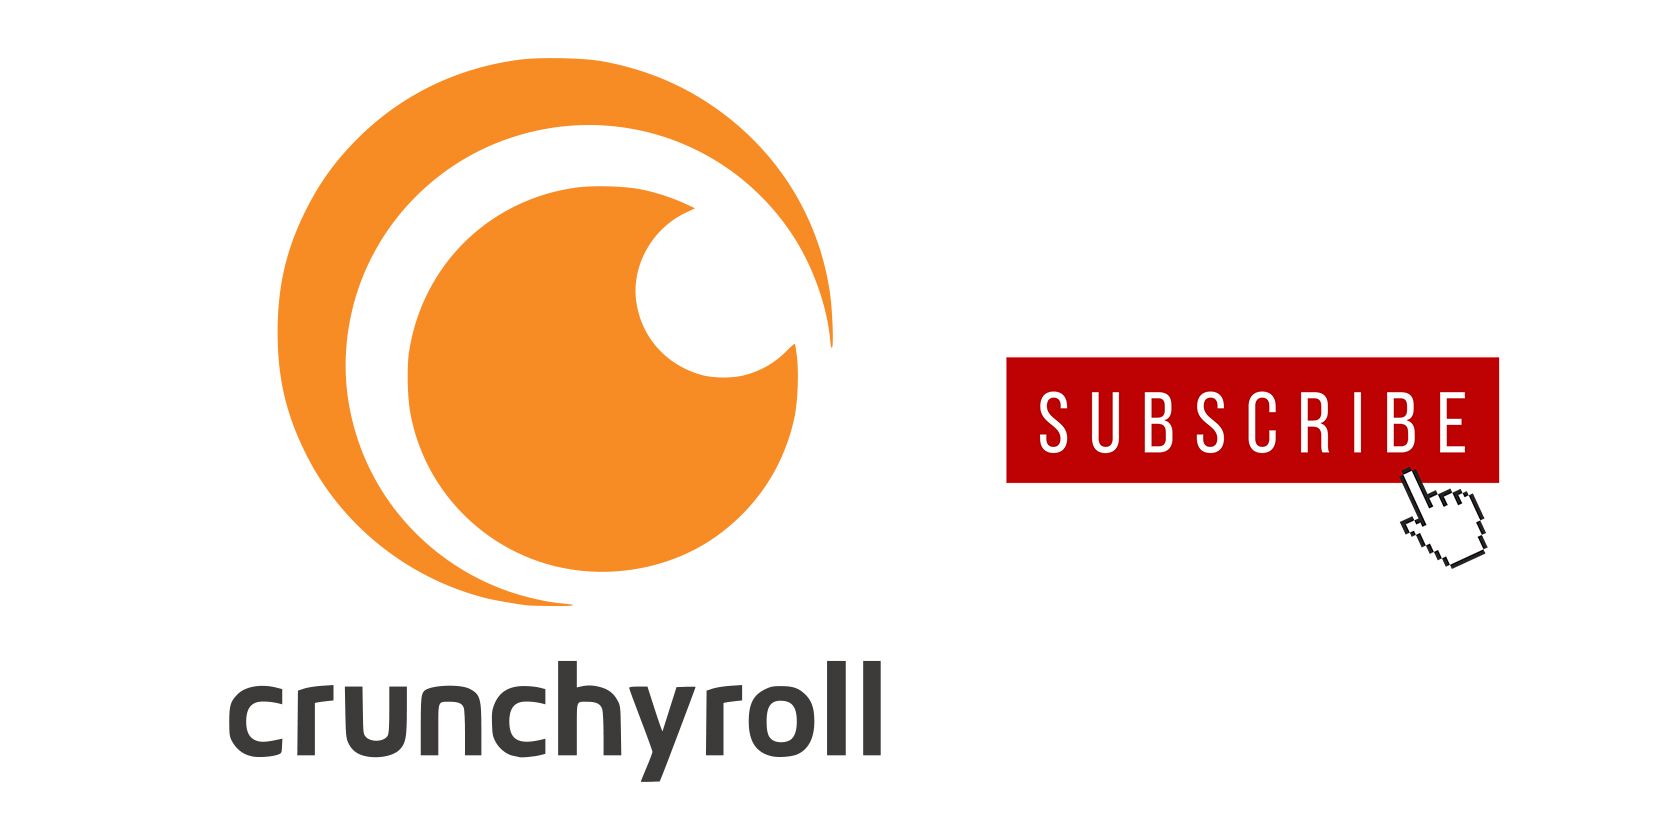 Crunchyroll subscription featured image